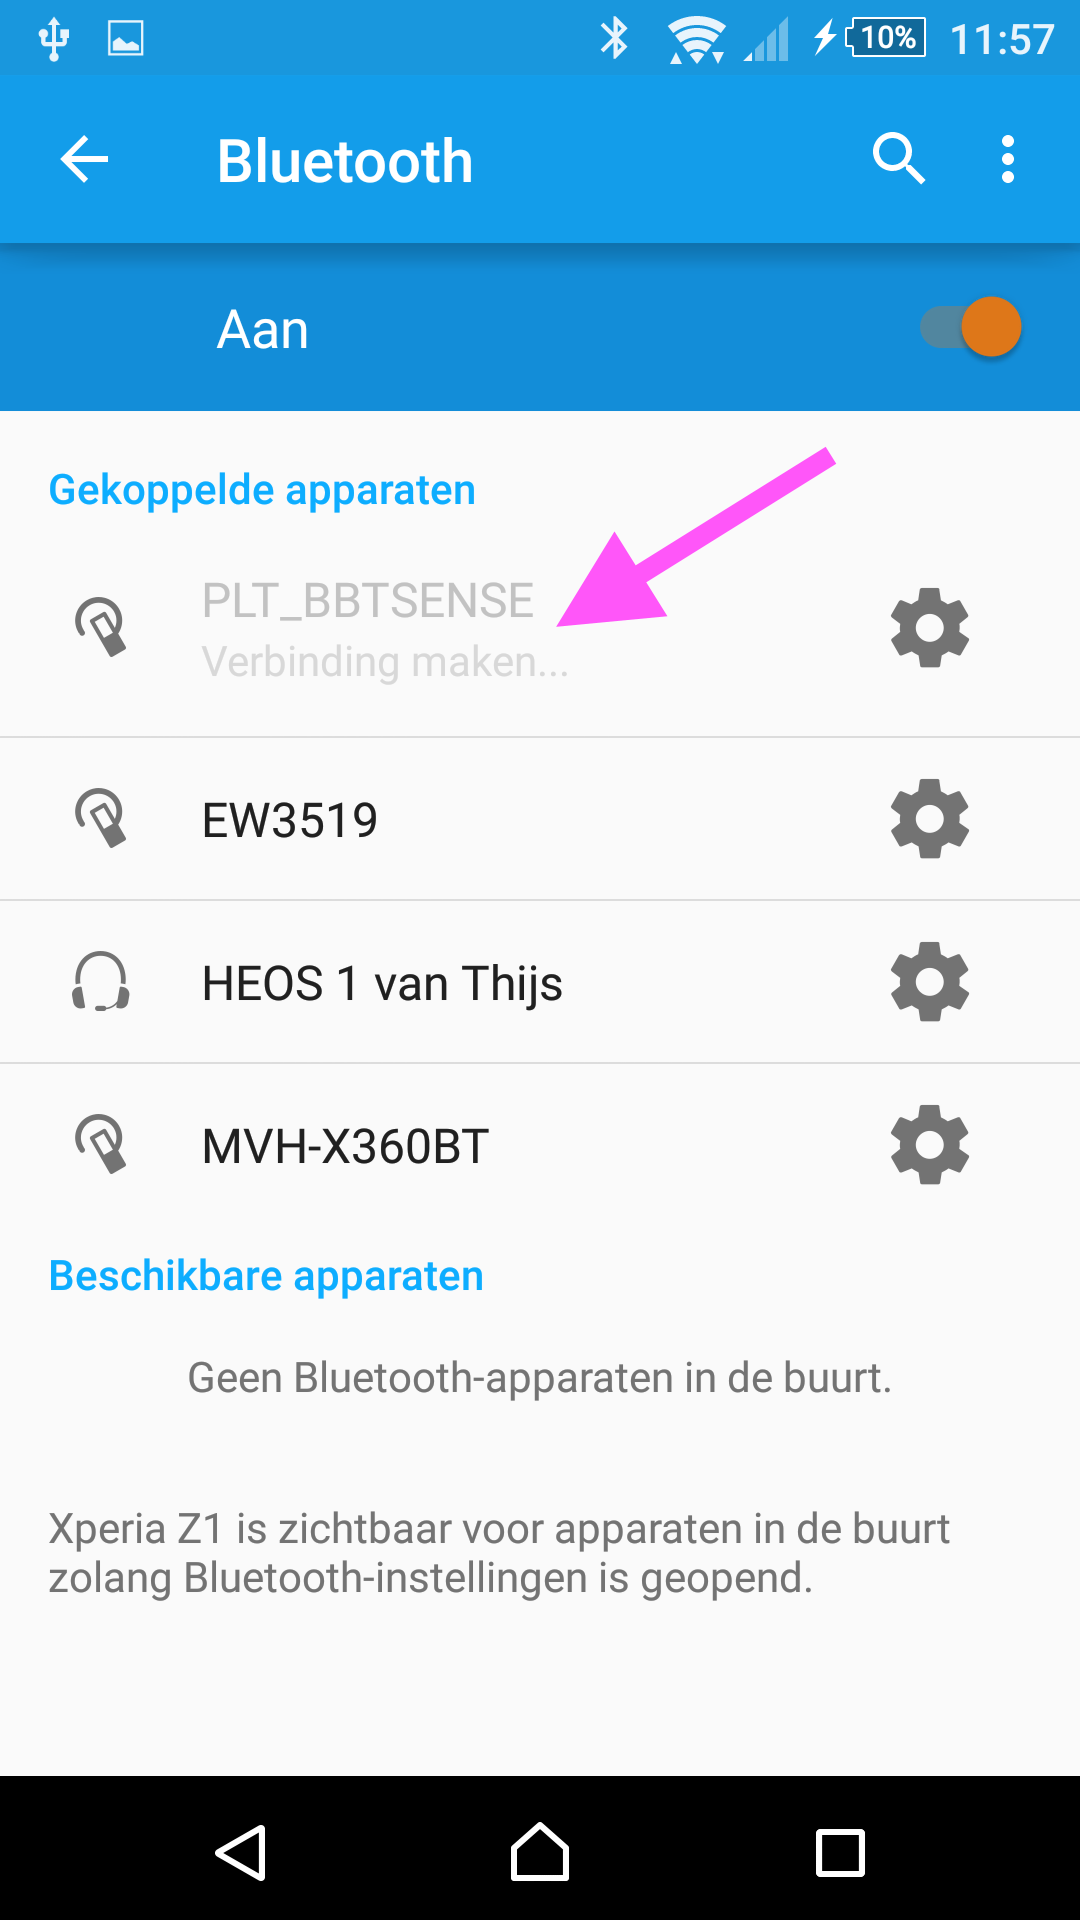 Bluetooth on Android 5